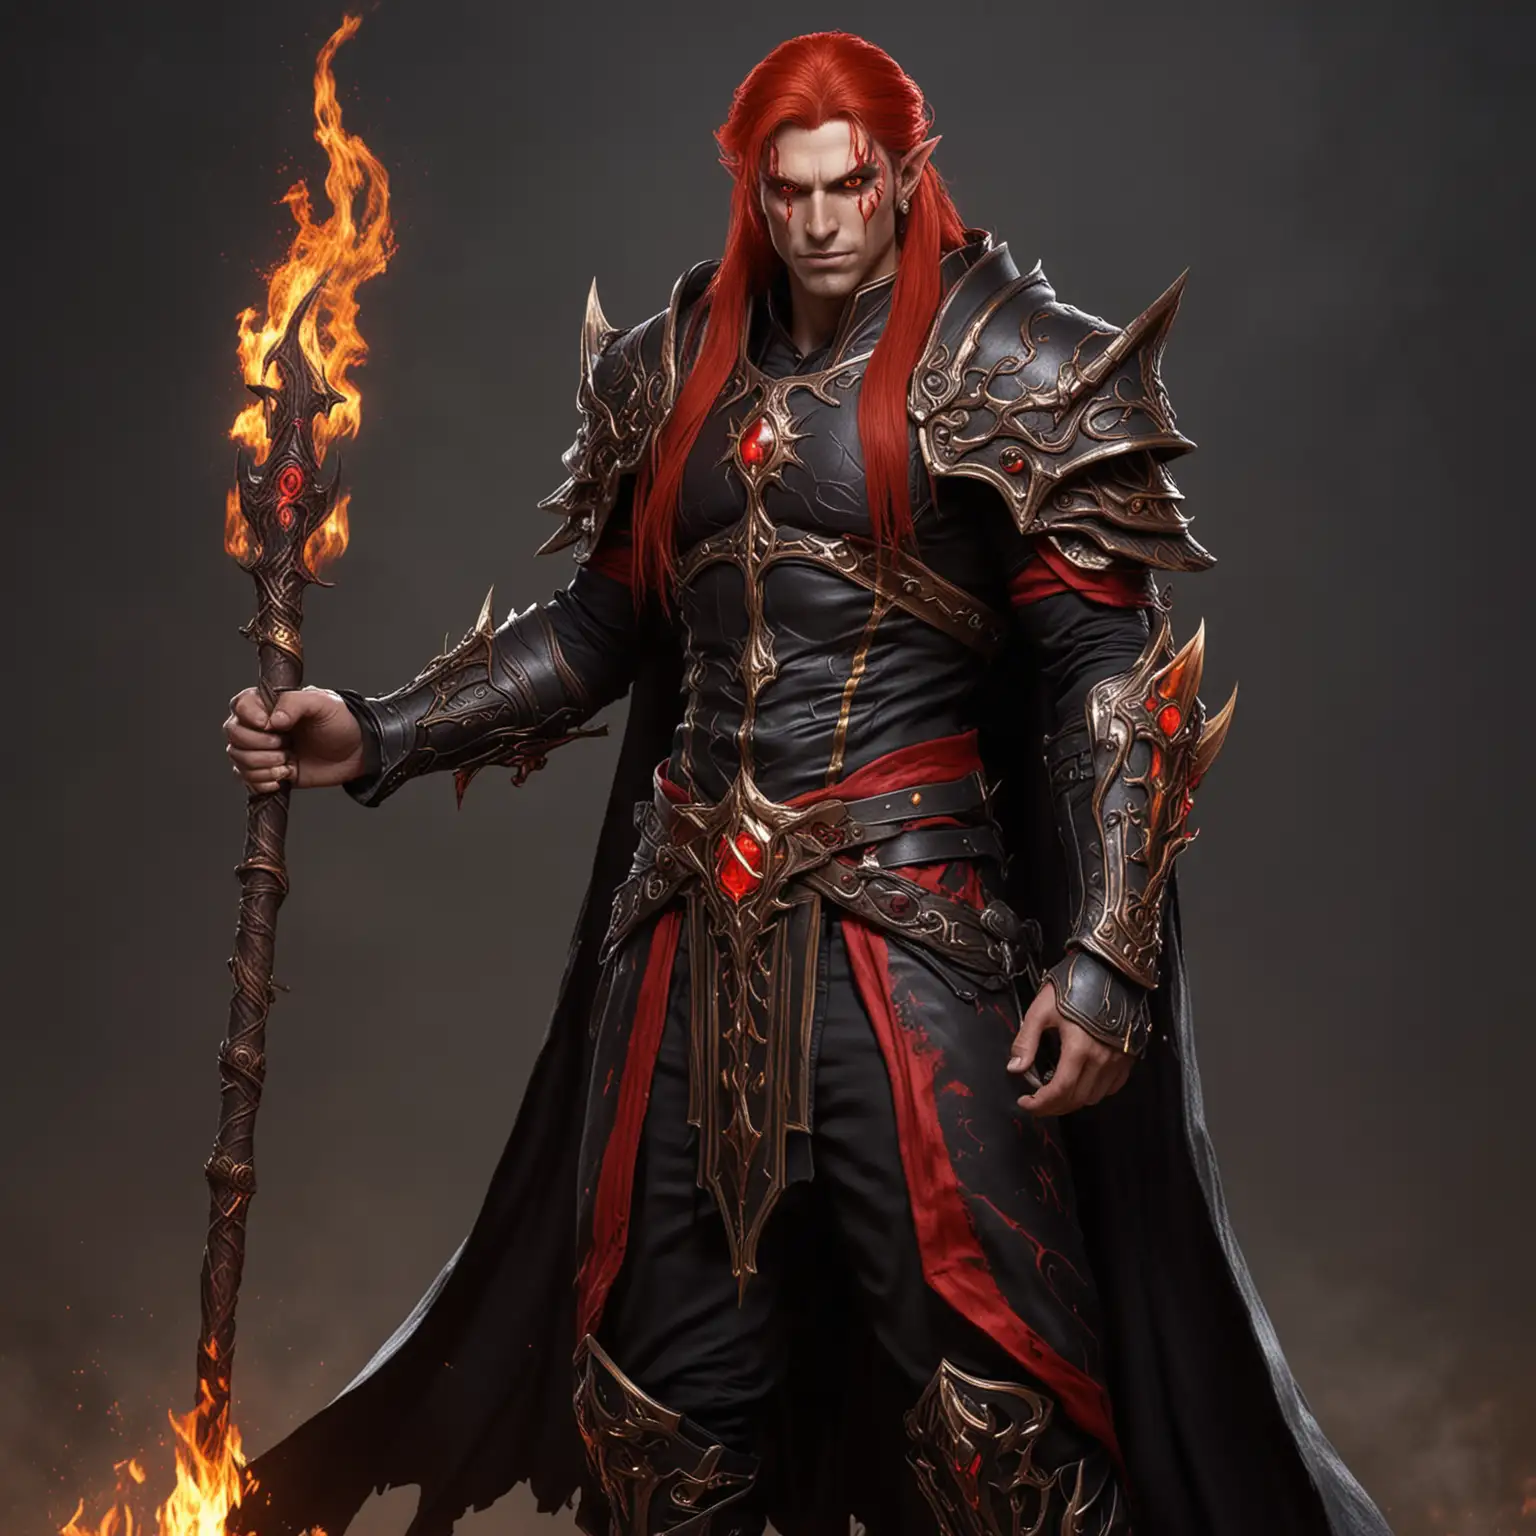 Attractive Blood Elf Priest with Fire Powers